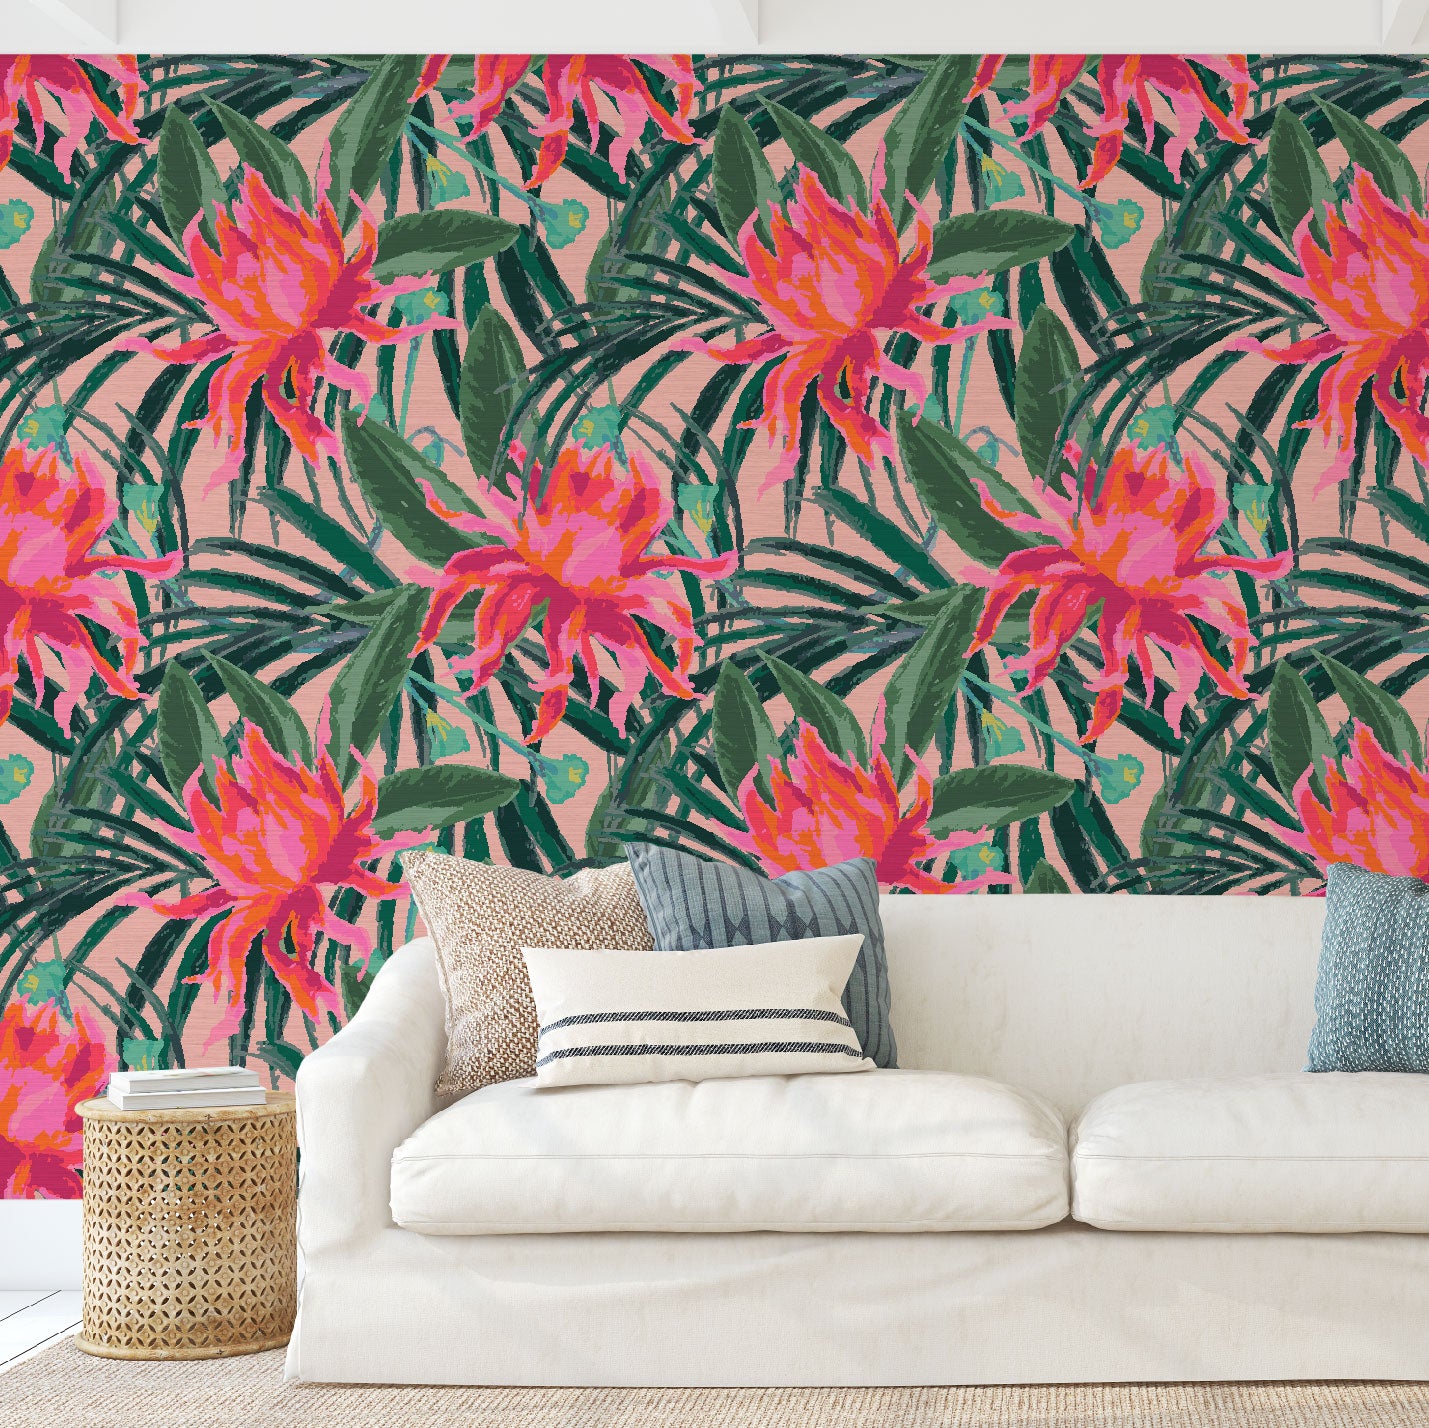 Load image into Gallery viewer, Living room with white couch and grasscloth wallpaper with light pink based featuring oversized painterly tropical flowers and palm leafs in striking shades of pink and leafs in shades of deep green
